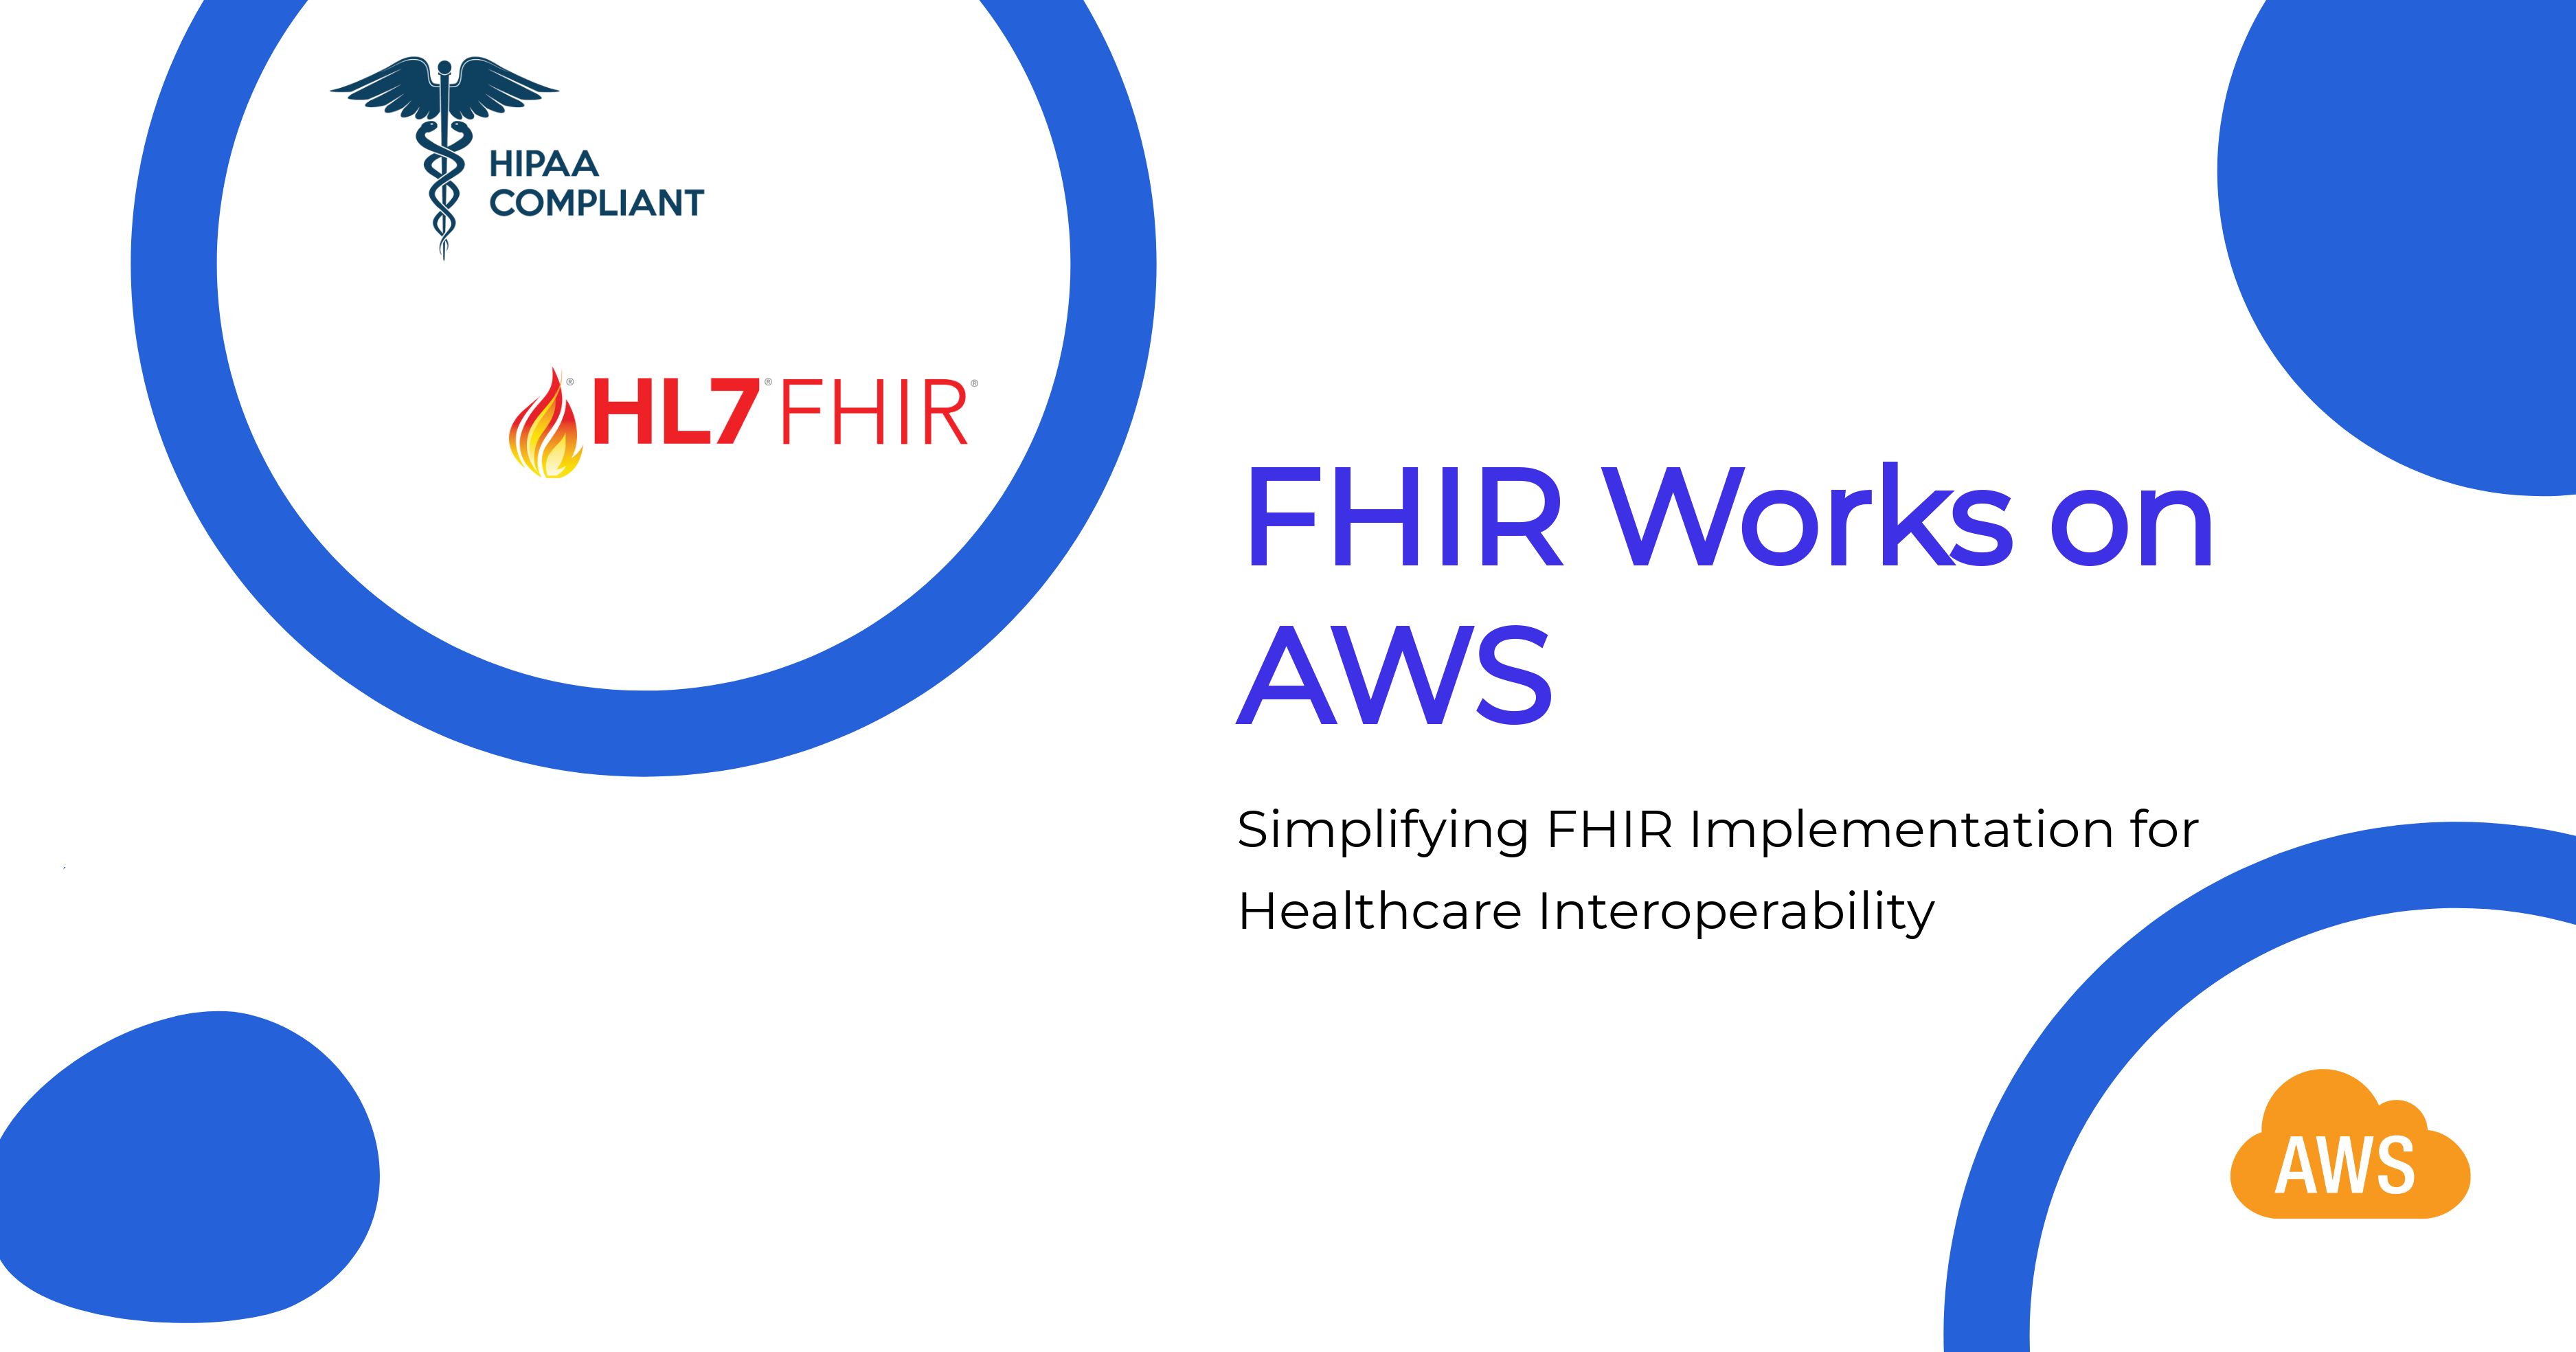 Simplifying FHIR Implementation for Healthcare Interoperability